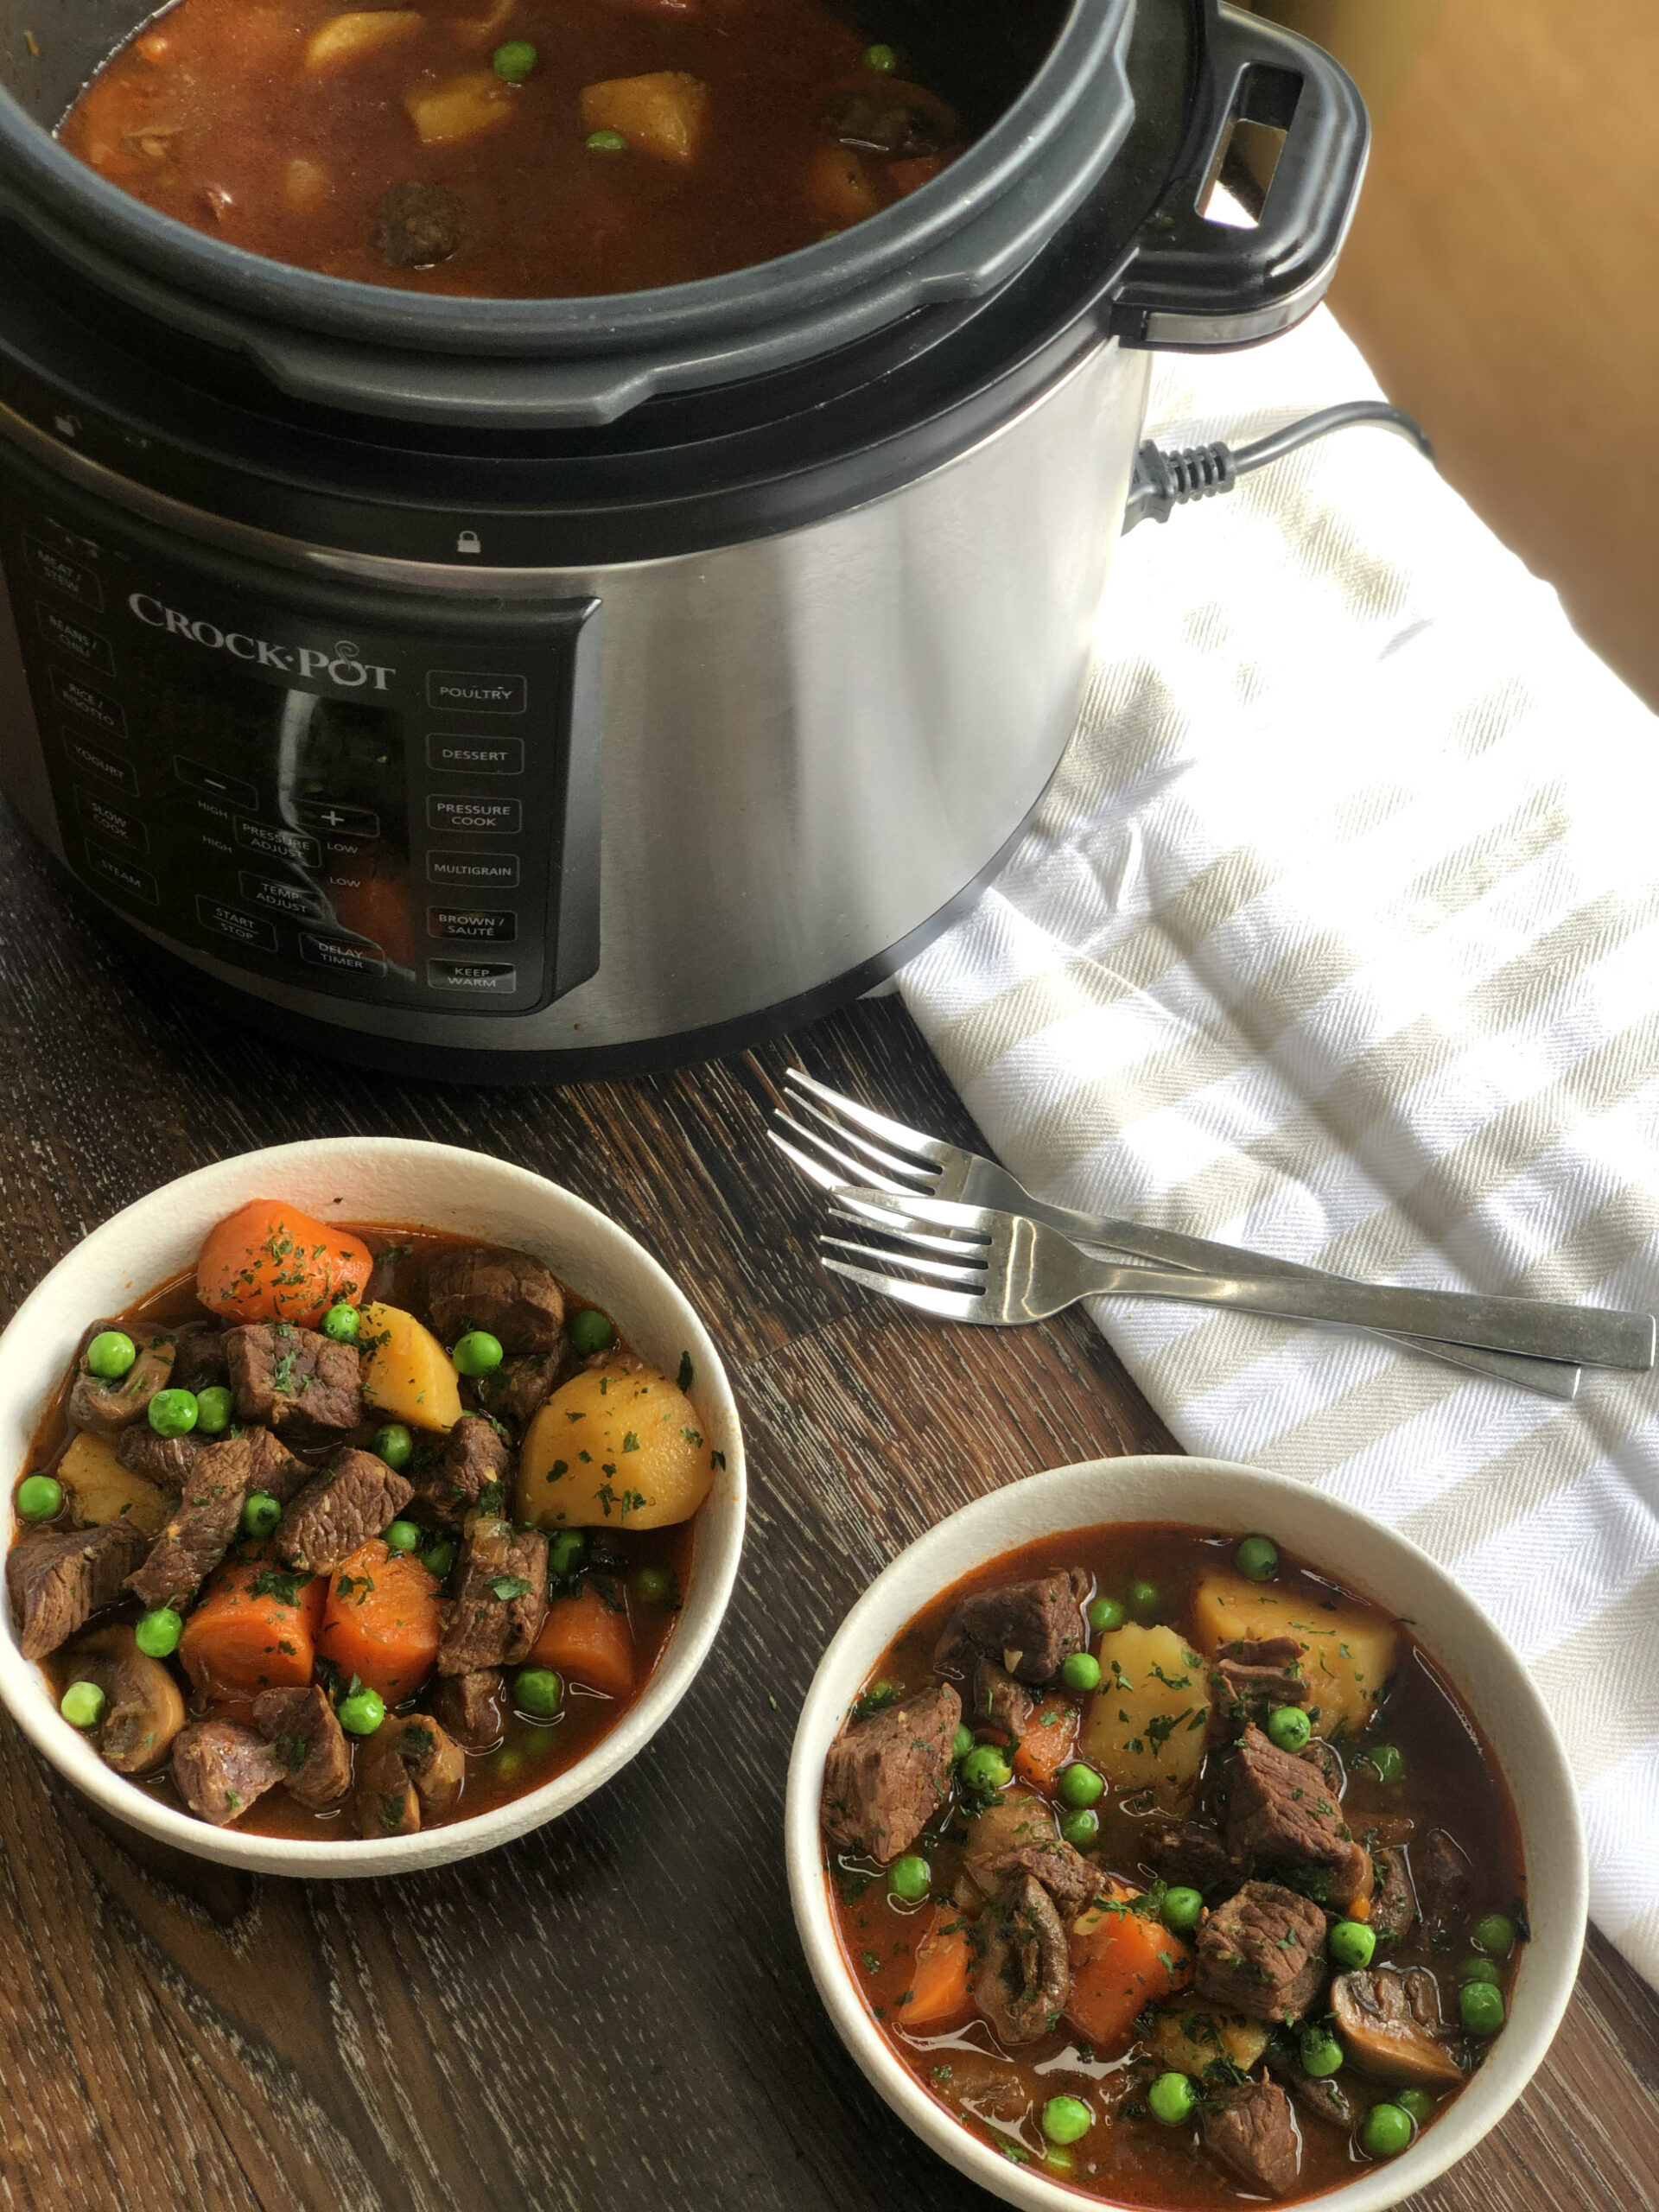 Slow Cooker Beef Stew cooked in a CrockPot